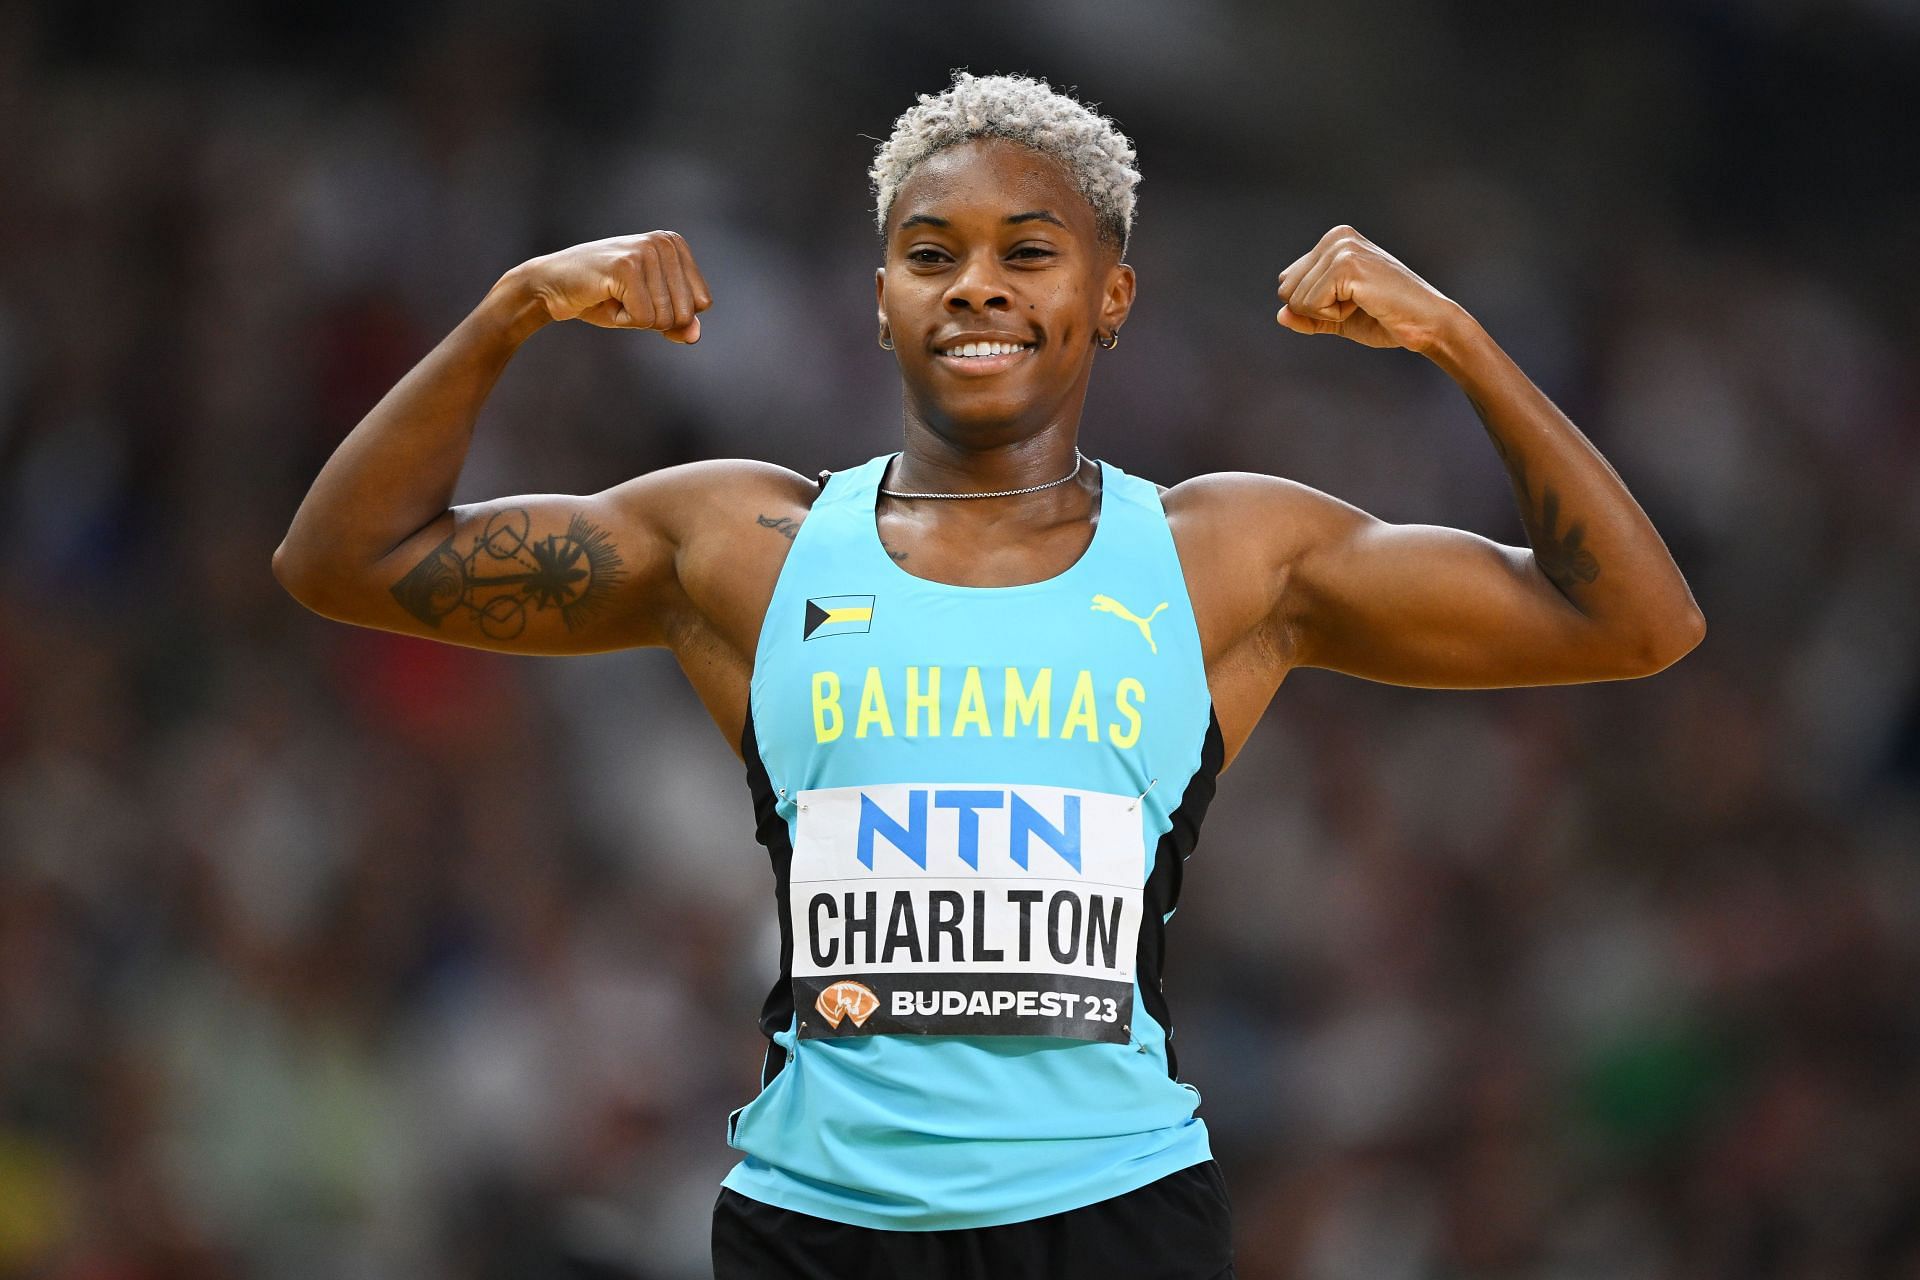 Devynne Charlton reacts prior to the Women&#039;s 100m Hurdles Semi-Final during the World Athletics Championships 2023 in Budapest, Hungary.